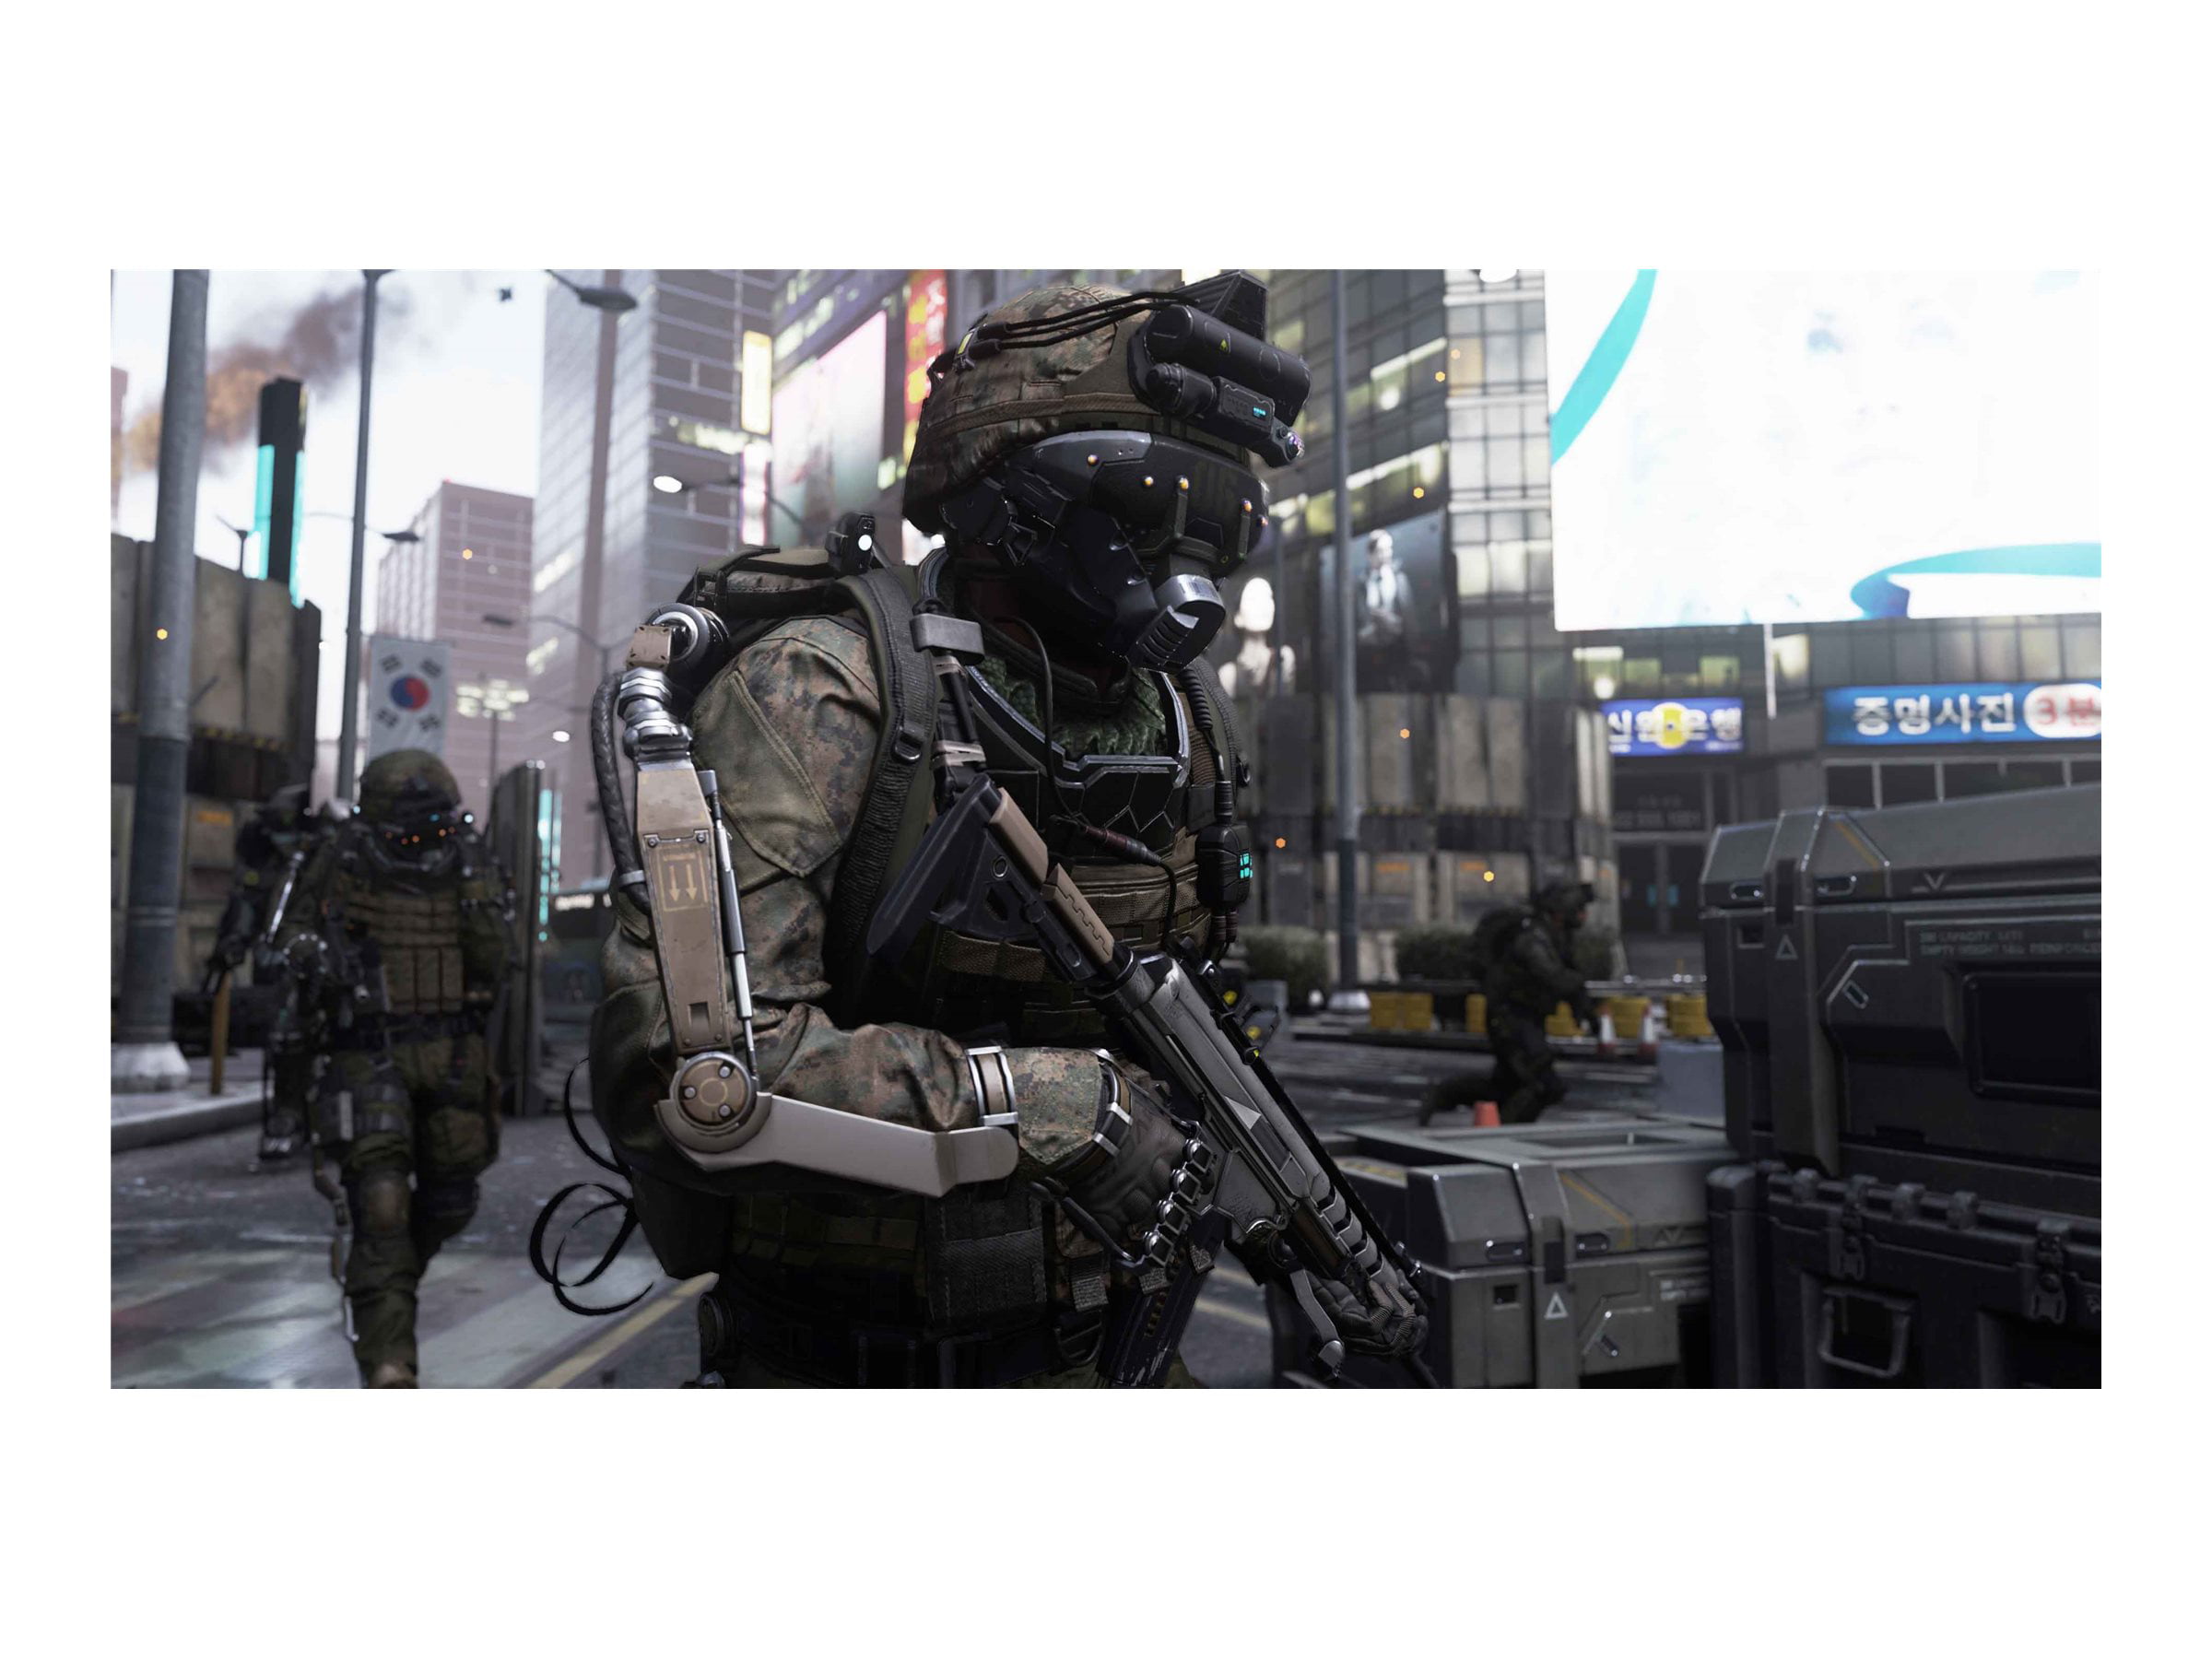 Call of Duty: Advanced Warfare (Day Zero Edition) cover or packaging  material - MobyGames